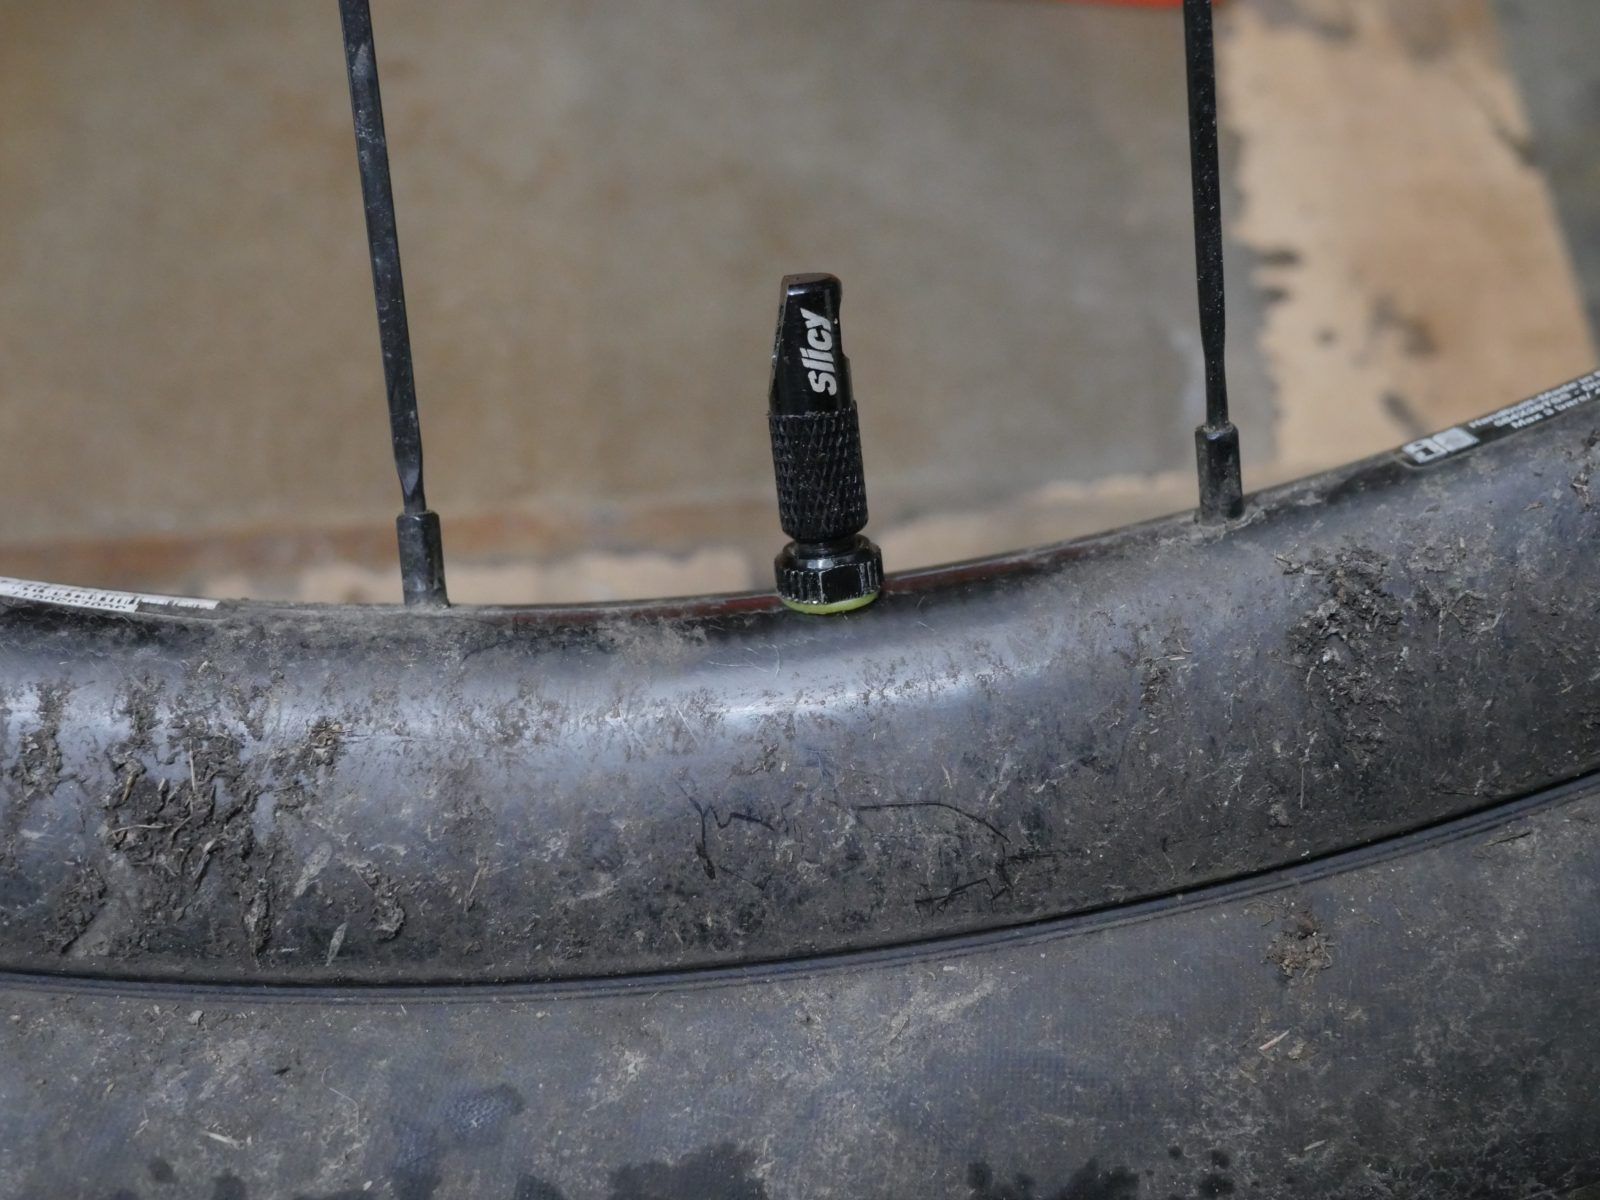 Slicy Slicy Products Smooth Tyre Insert